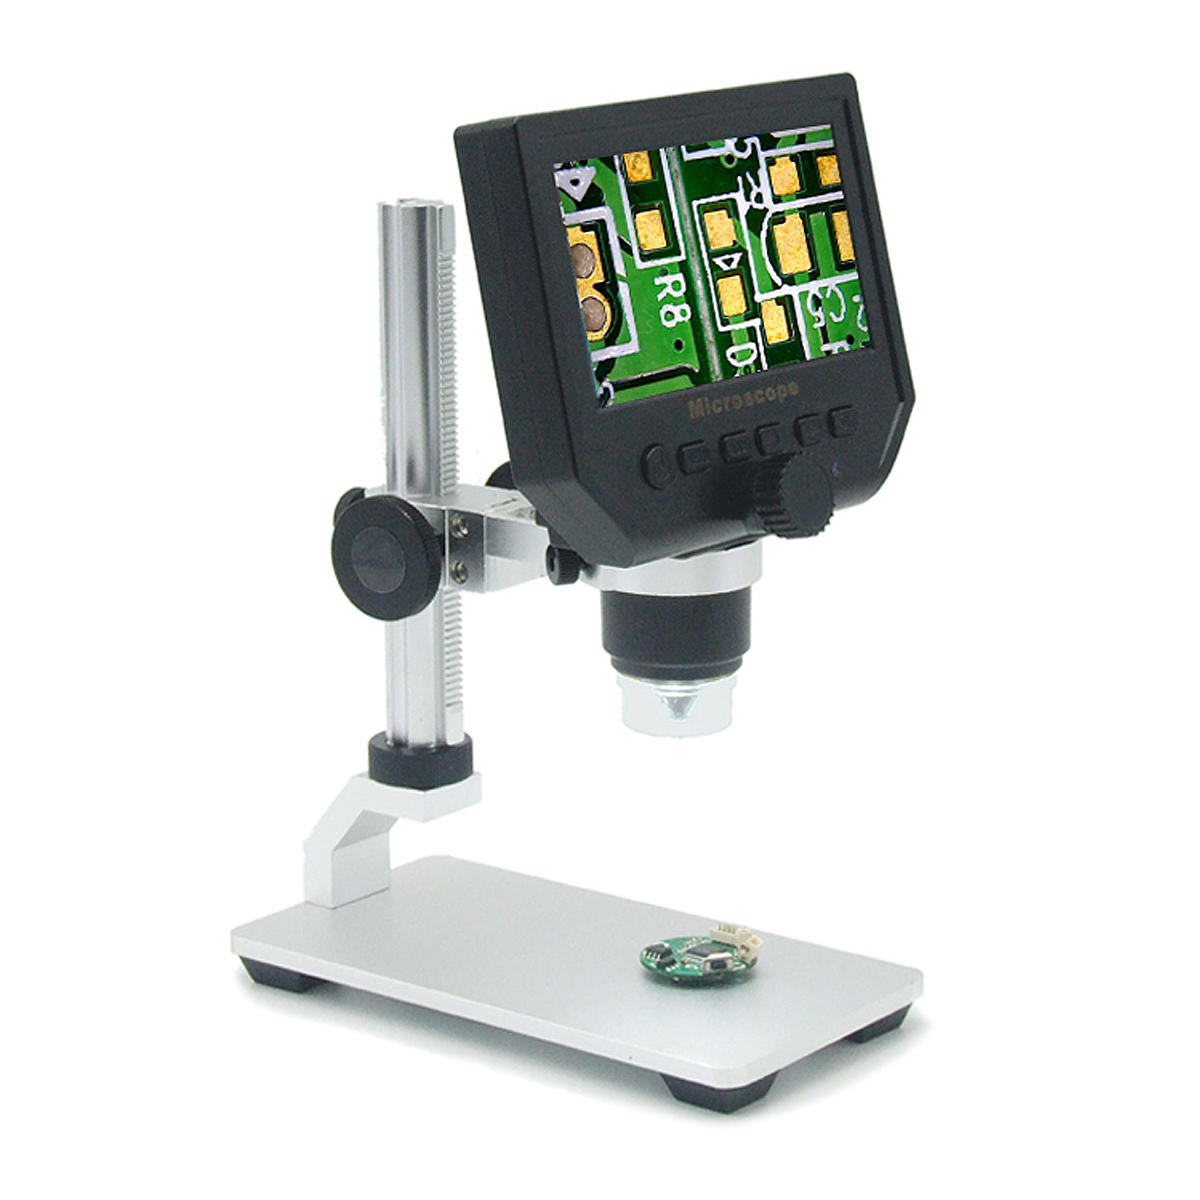 Mustool G600 Digital 1-600X 3.6MP 4.3inch HD LCD Display Microscope Continuous Magnifier with Aluminum Alloy Stand Upgrade Version 80